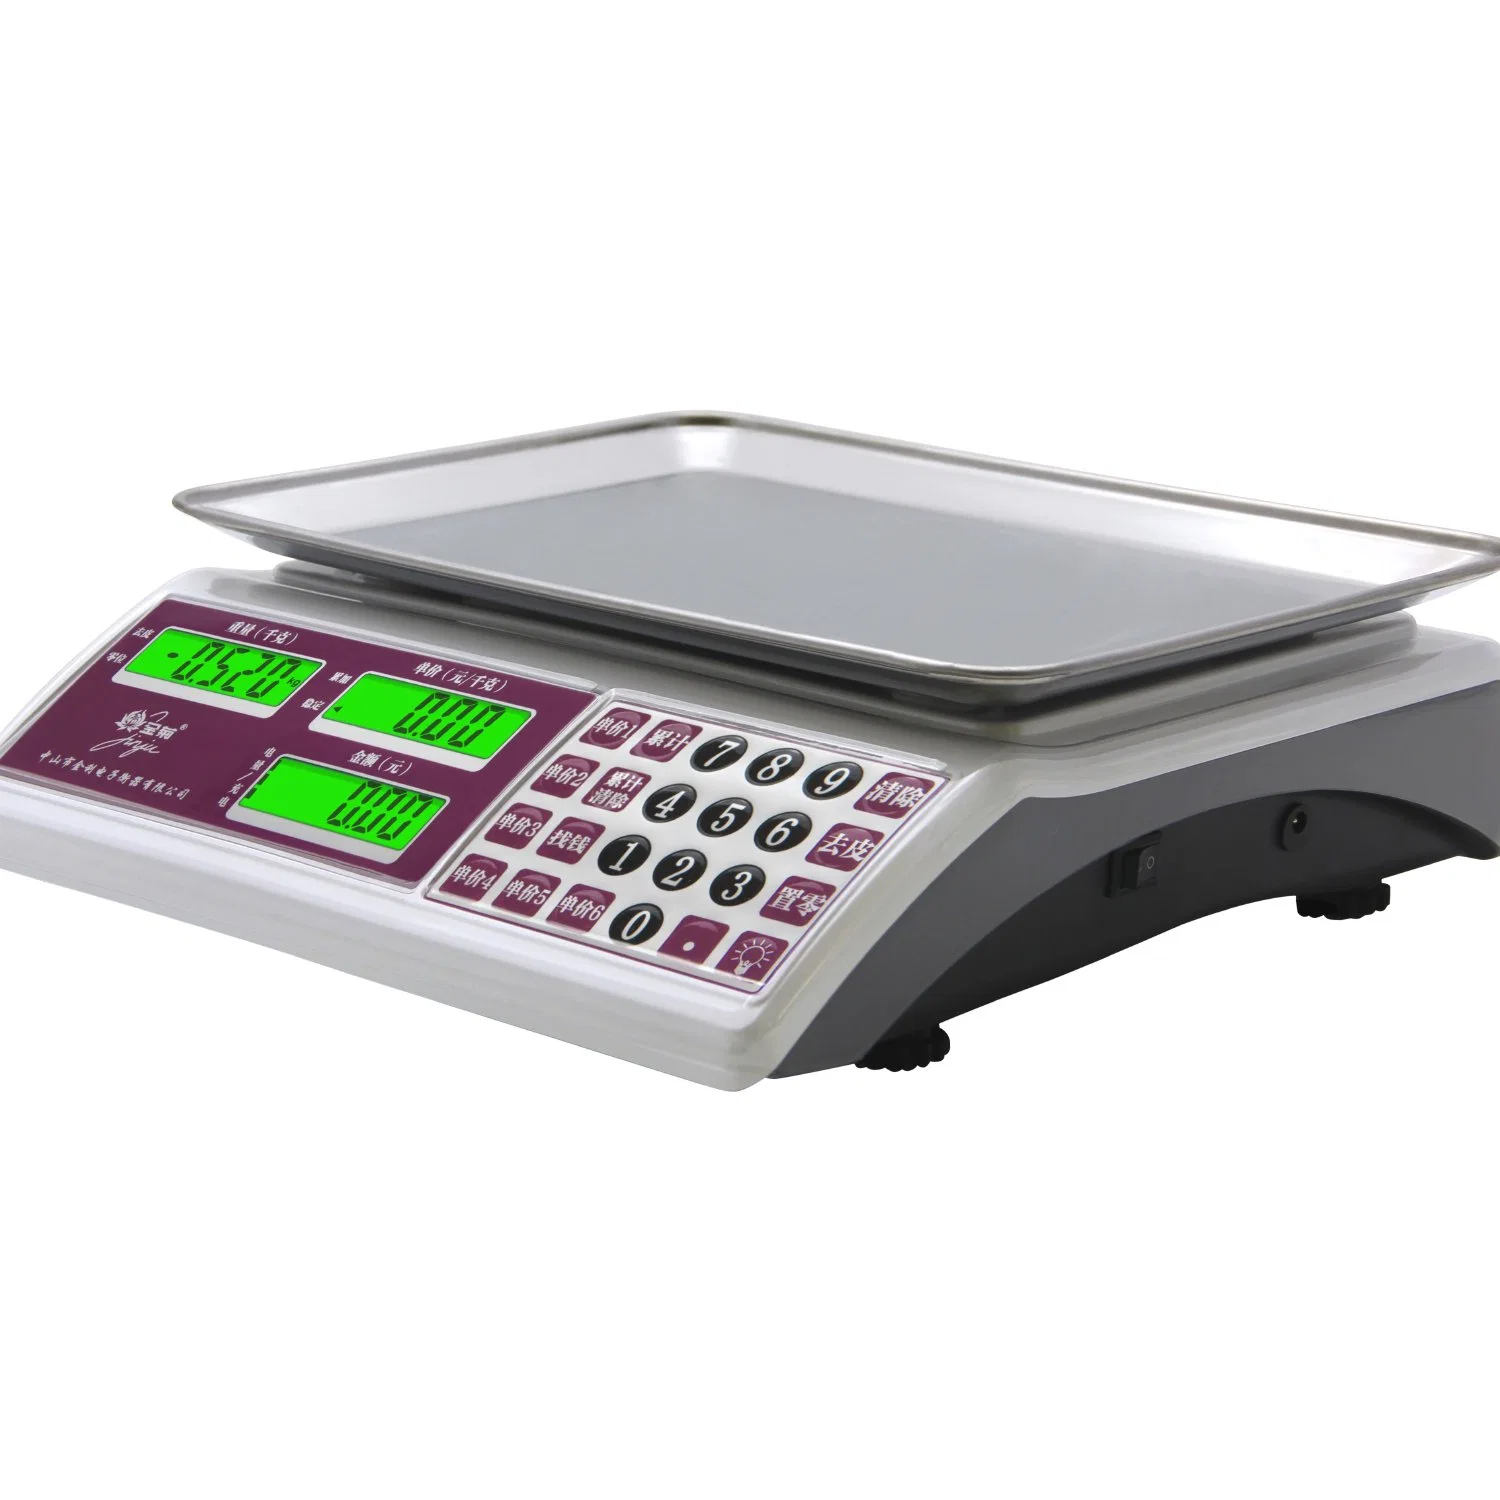 Acs-30jc Electronic Digital Commercial Price Computing LCD Backlight Weighing Balance Scale